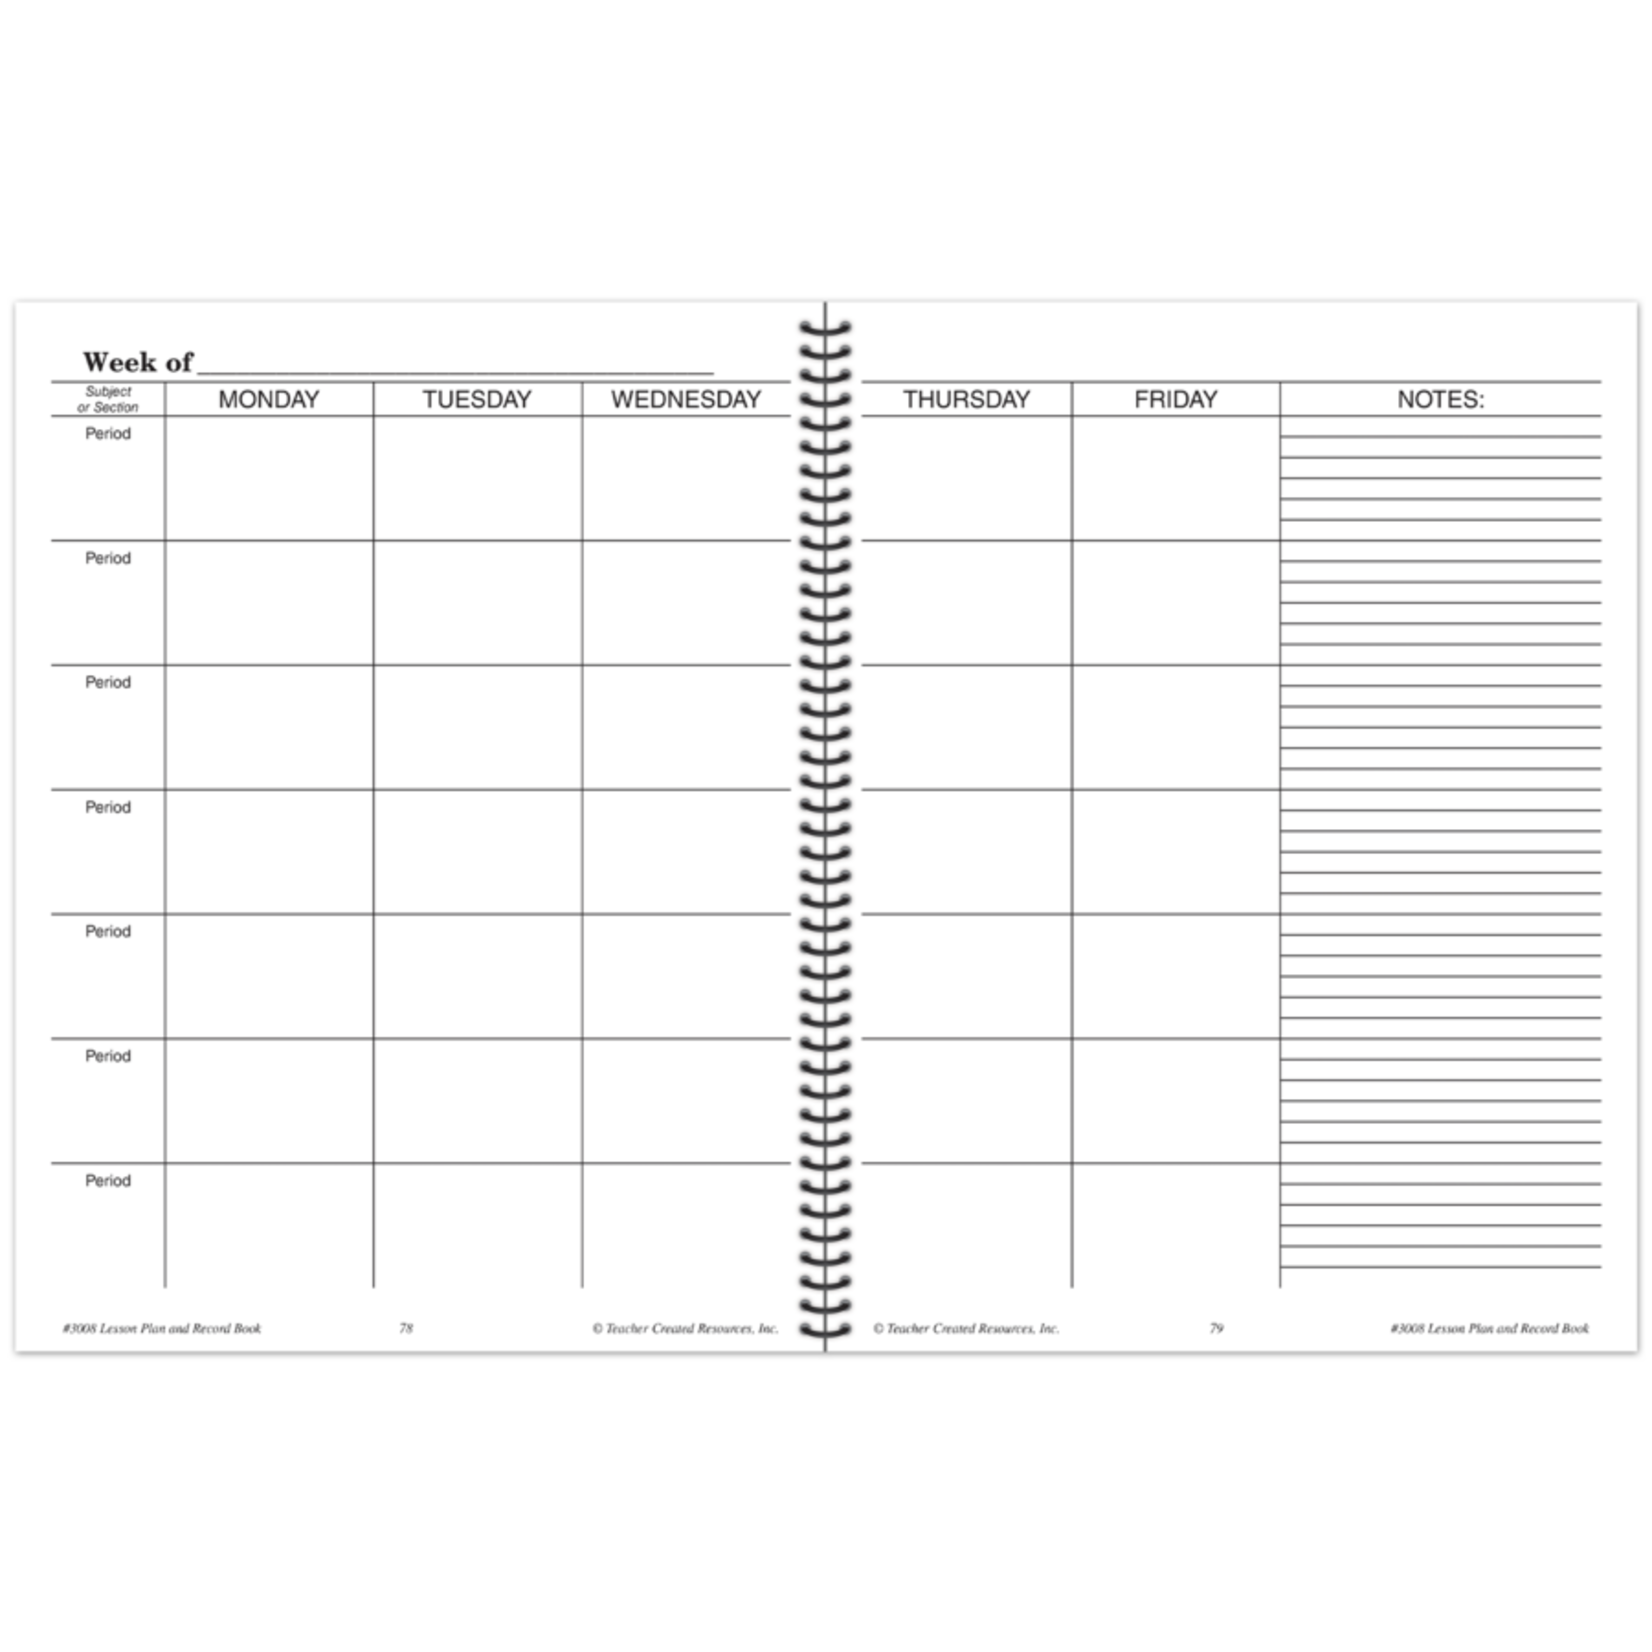 TEACHER CREATED RESOURCES Lesson Plan and Record Book